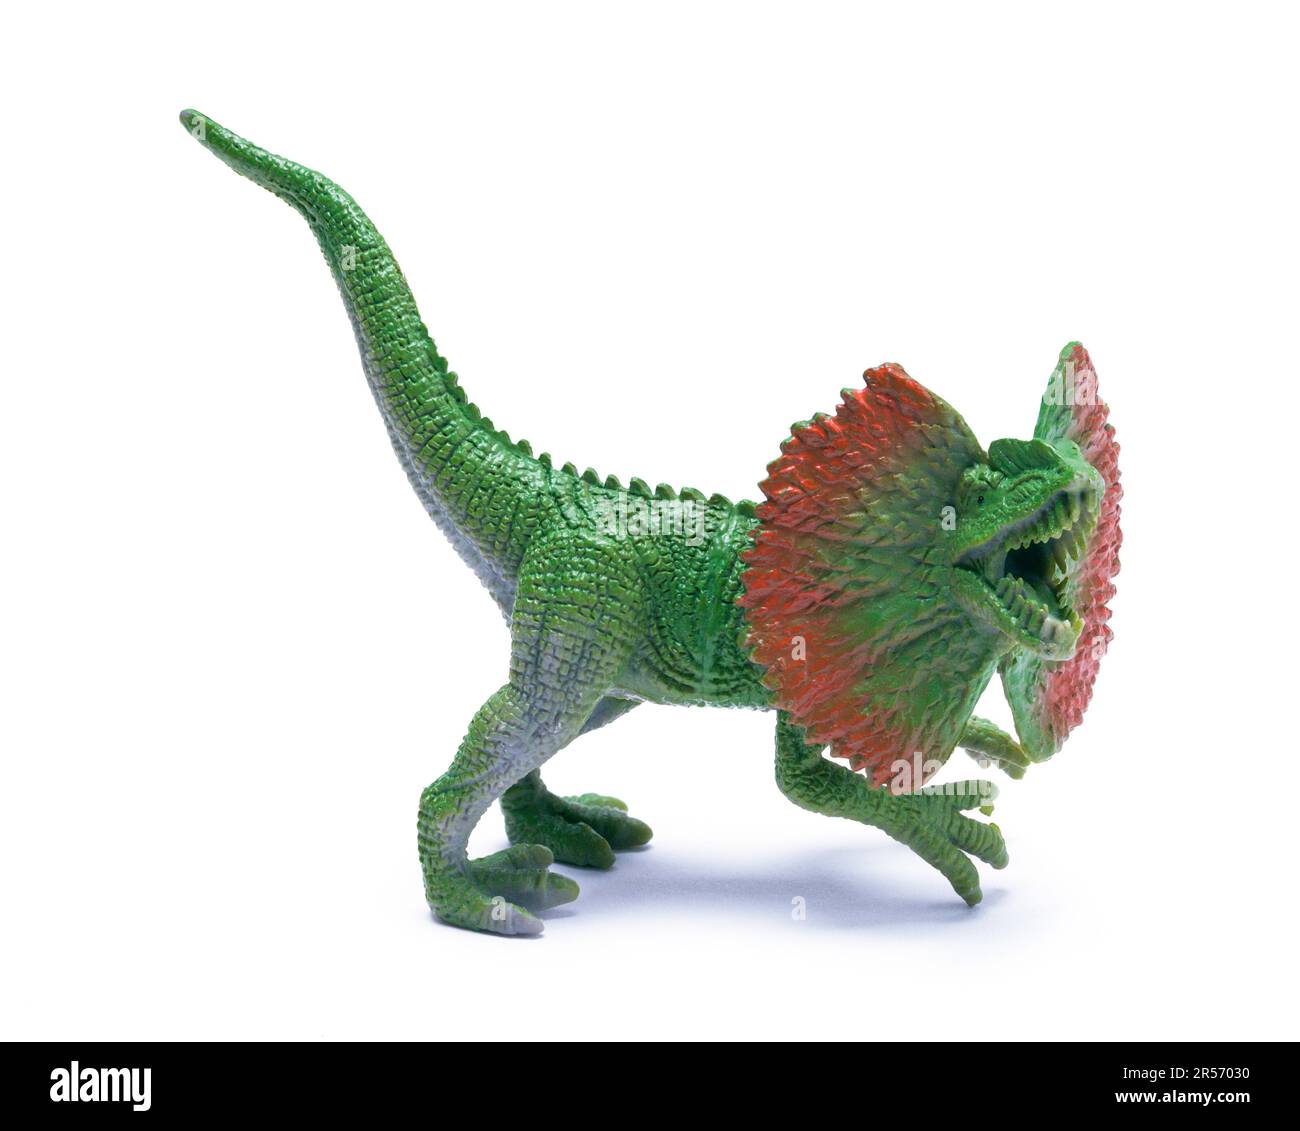 Vert Dinosaur Toy Cut Out on White. Banque D'Images